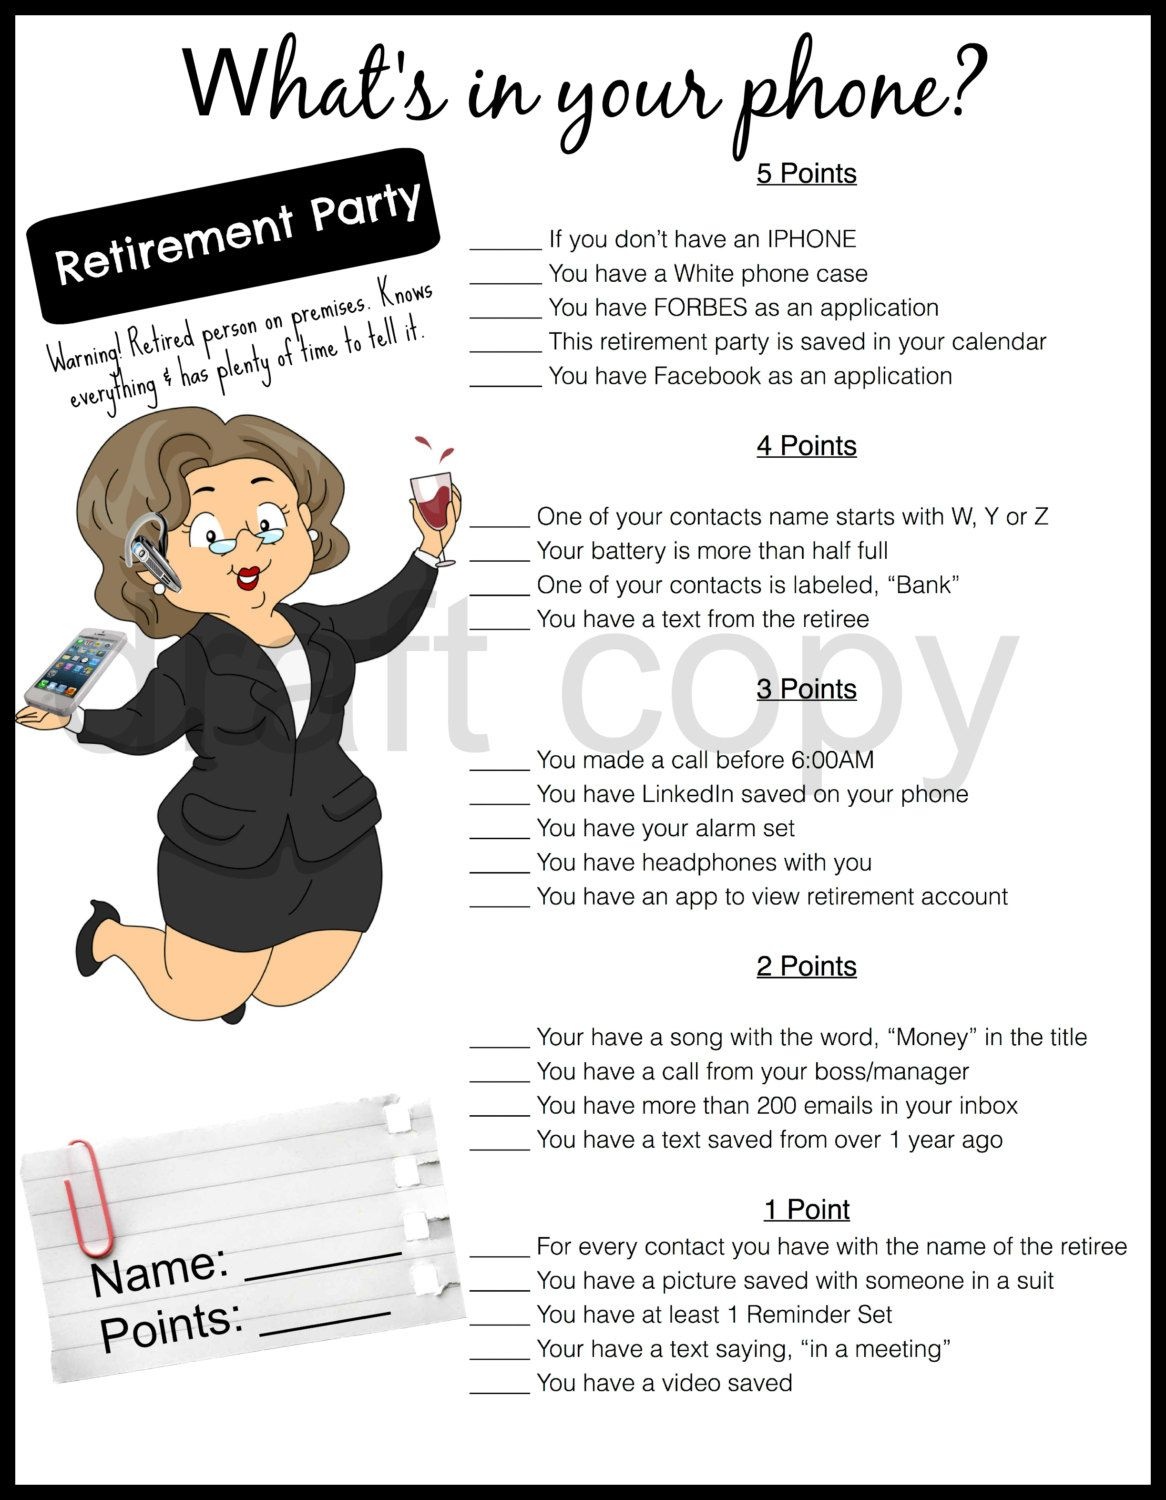 Retirement Party Game-Whats In Your Phone | Retirement Party Games - Retirement Party Games Free Printable